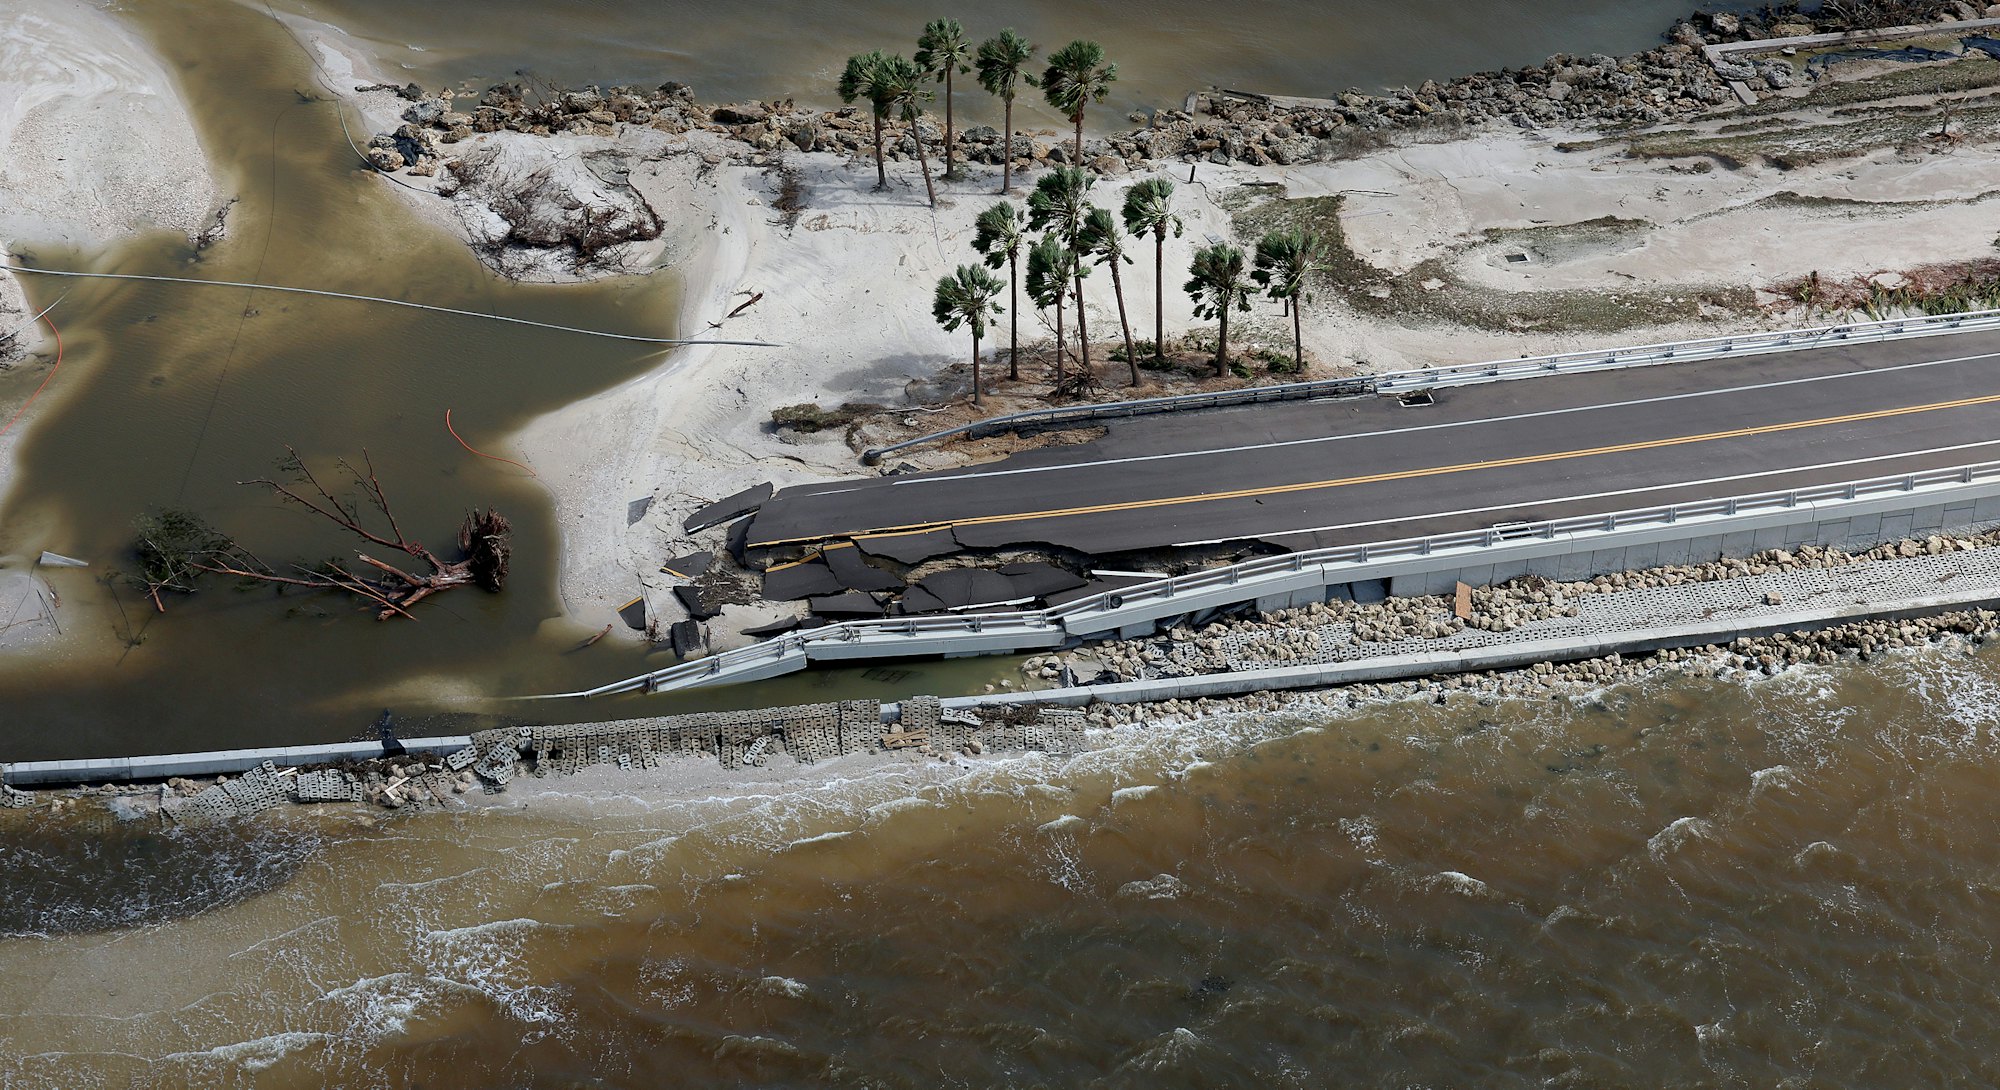 SANIBEL, FLORIDA - SEPTEMBER 29: In this aerial view, parts of Sanibel Causeway are washed away alon...